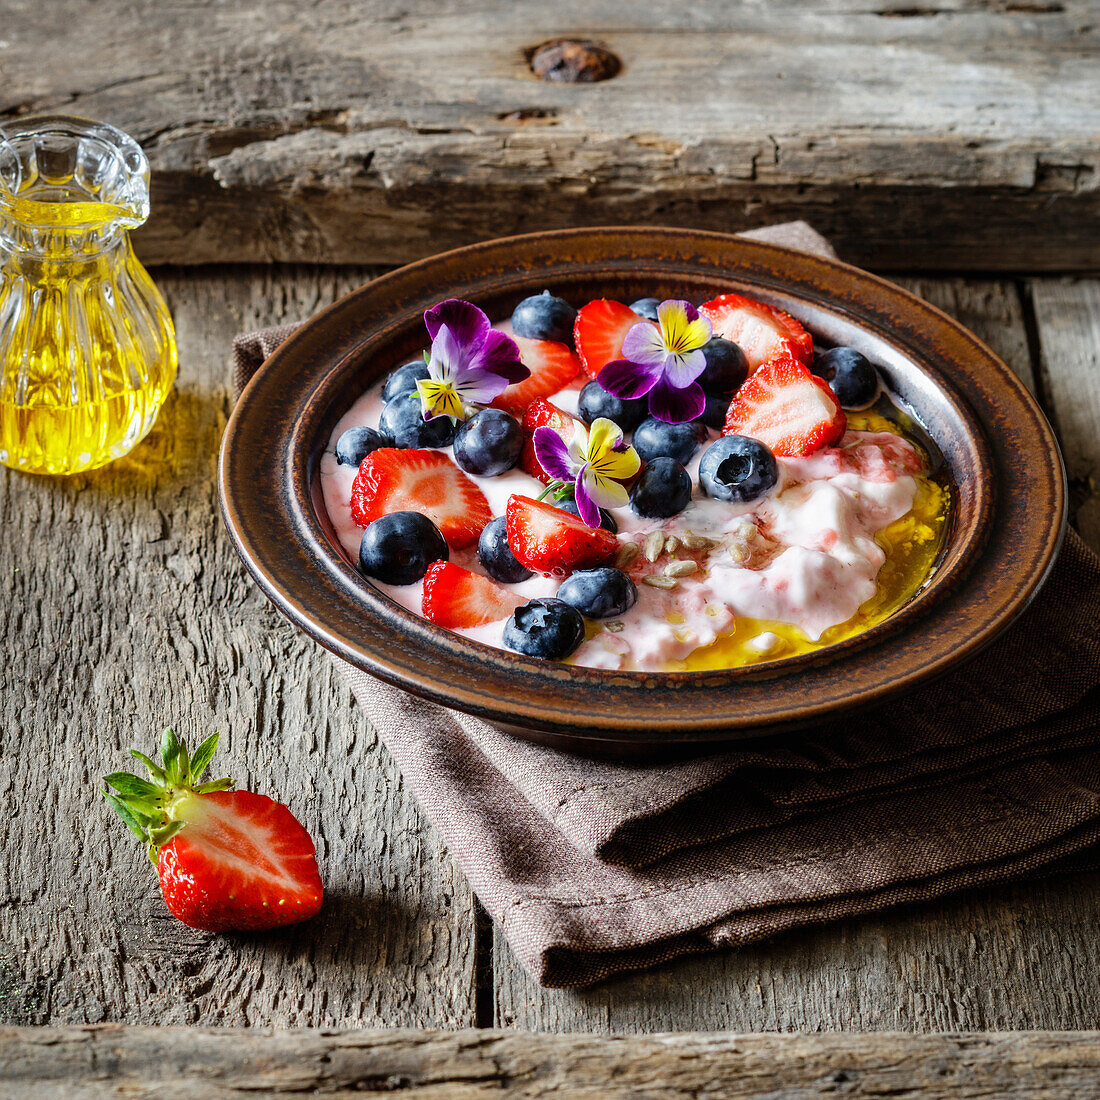 Plate of quark with strawberries, blueberries and edible flowers